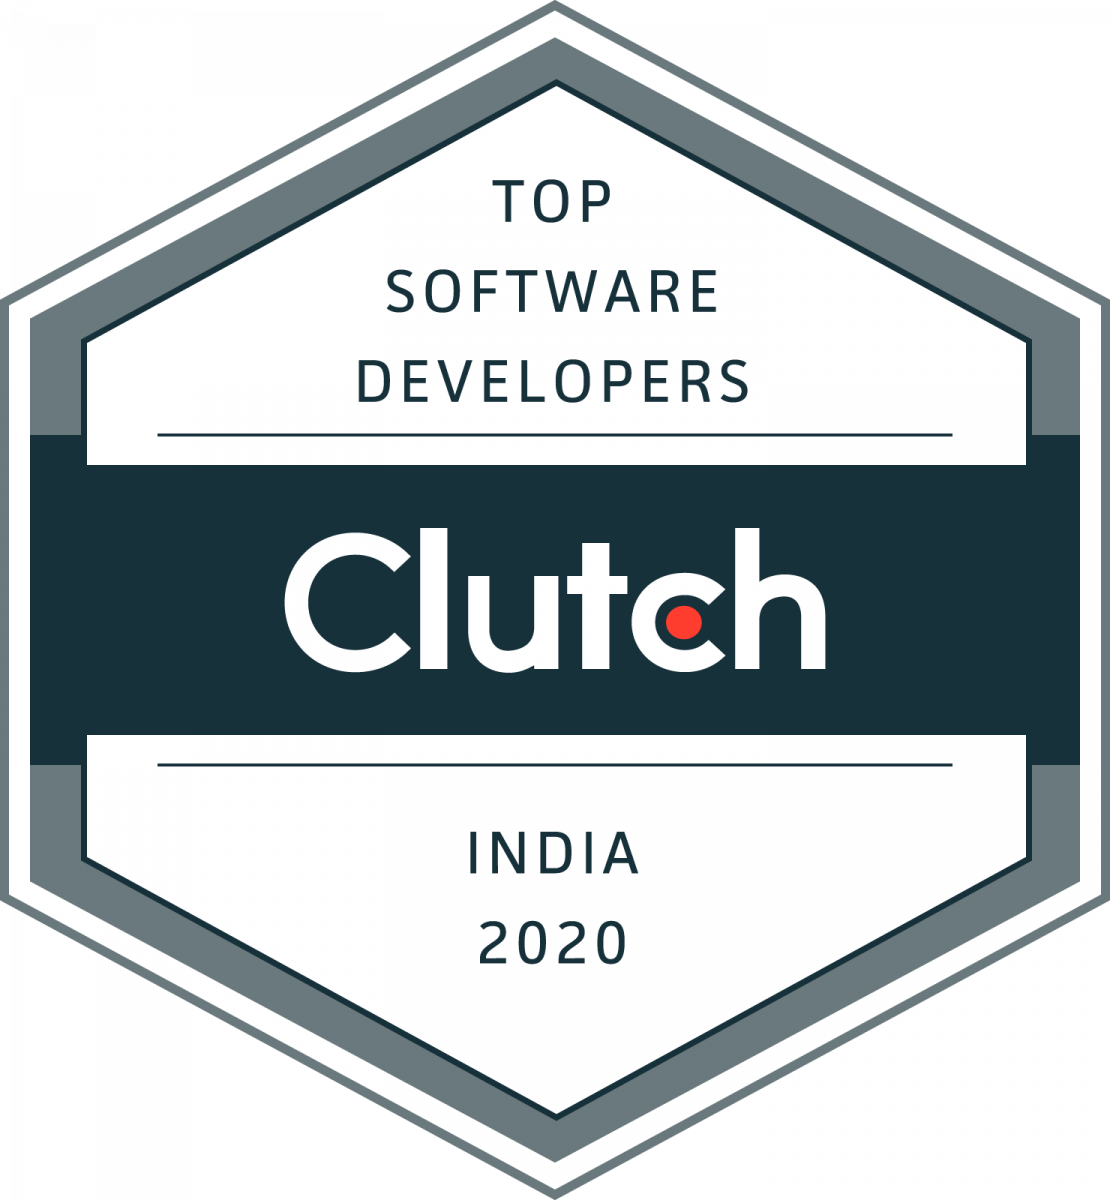 Neuronimbus Honored as Top Software Developer in India by Clutch